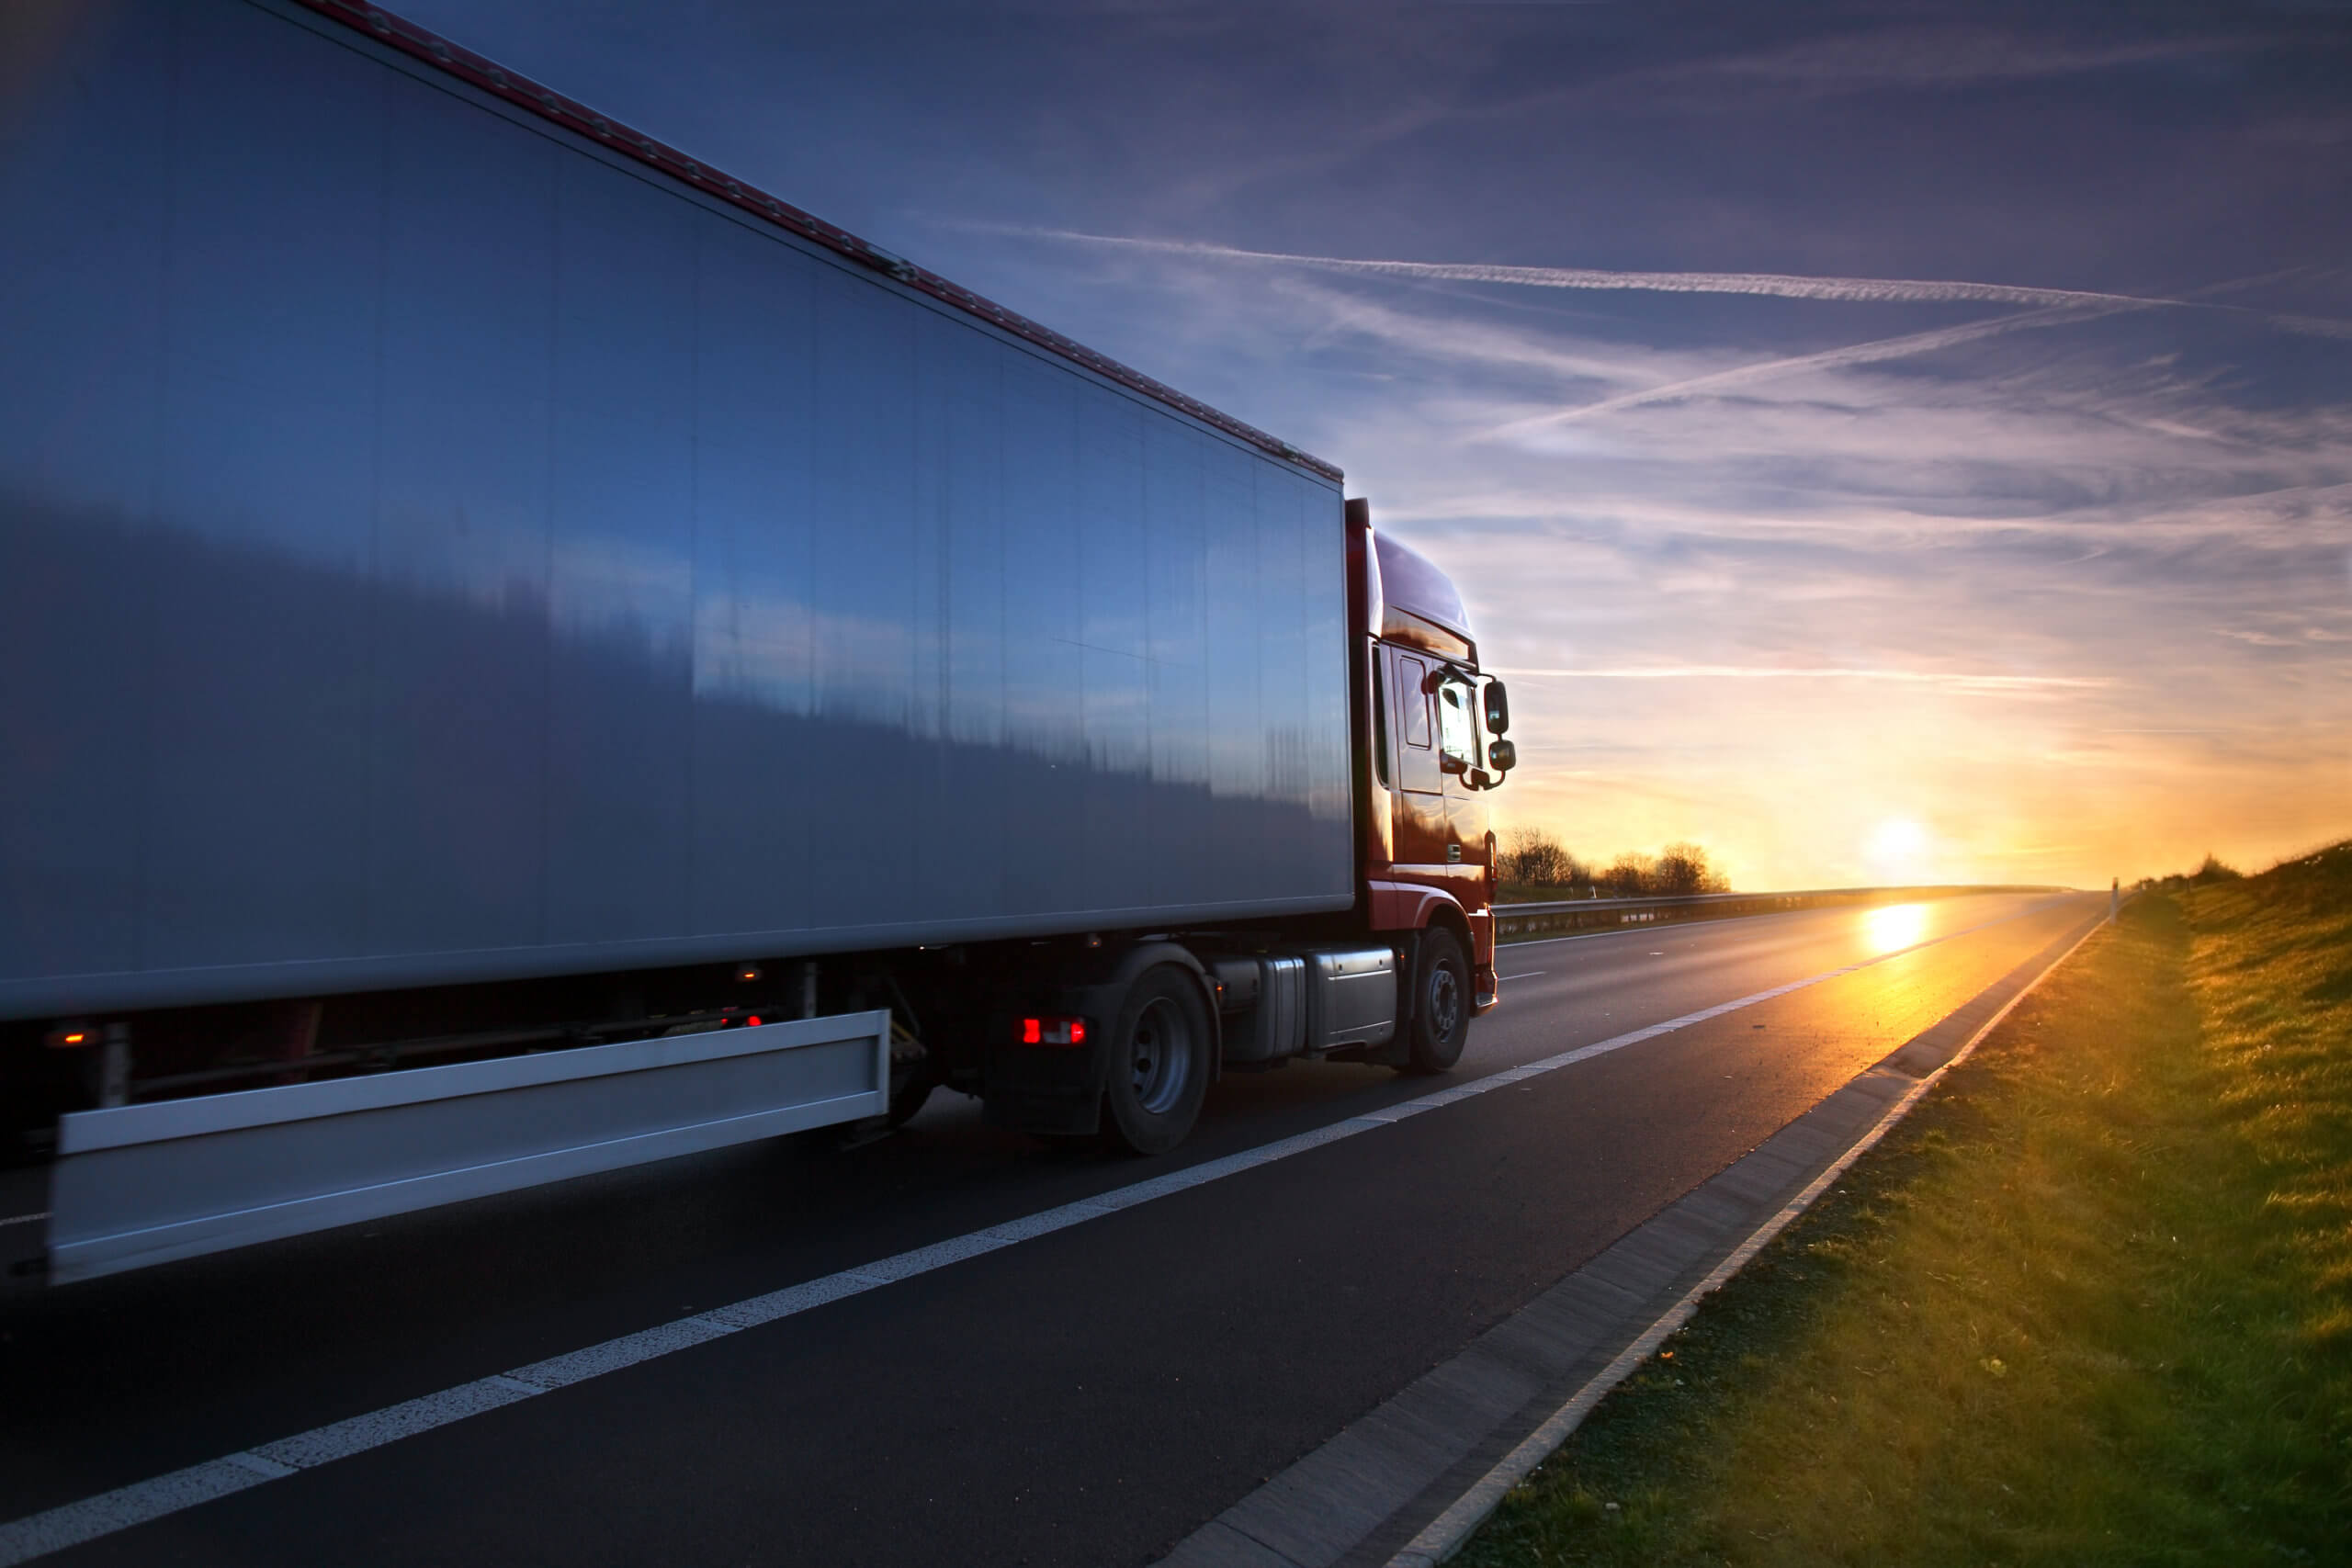 Wide Range Truck Loads and How They are Disrupting the Freight Industry